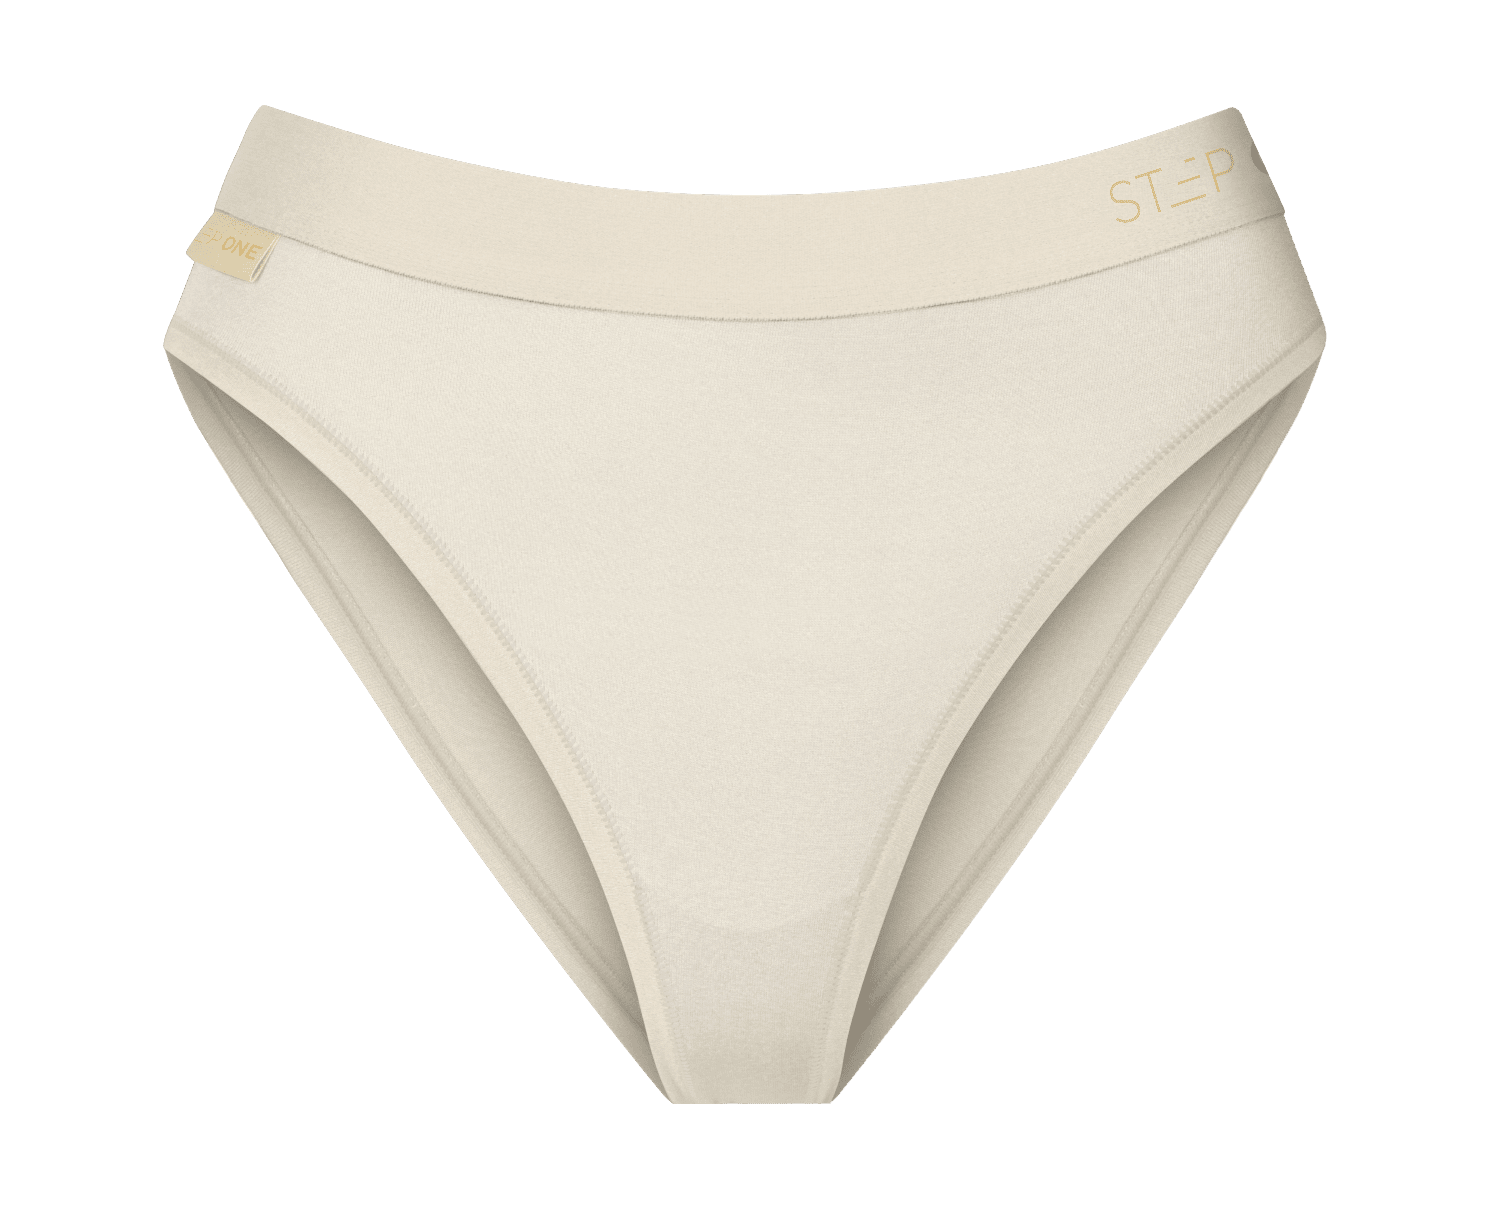 Stylish Paper Sticker On White Background Womens Panties Royalty